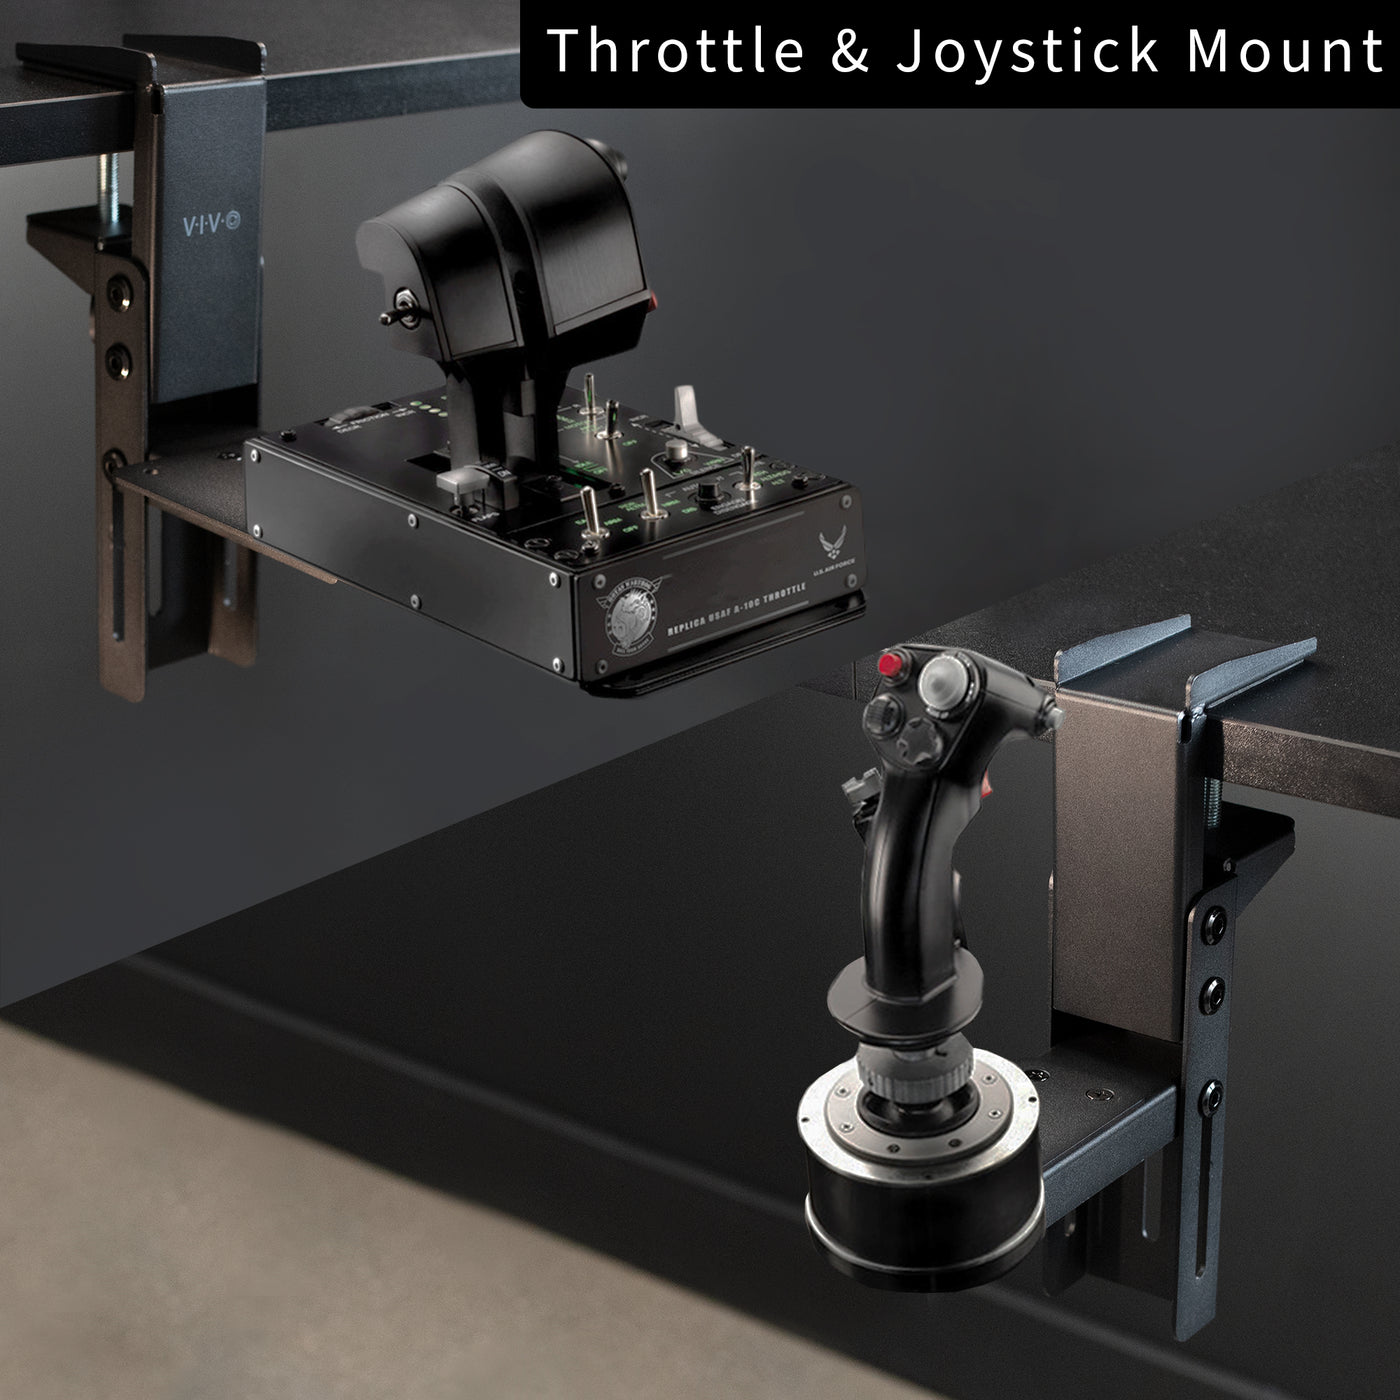 Steel Clamp-on Joystick and Throttle Mount Designed ONLY for Thrustmaster Hotas Warthog Dual Throttle System for Windows, Attaches to Desks up to 2.3 inches Thick